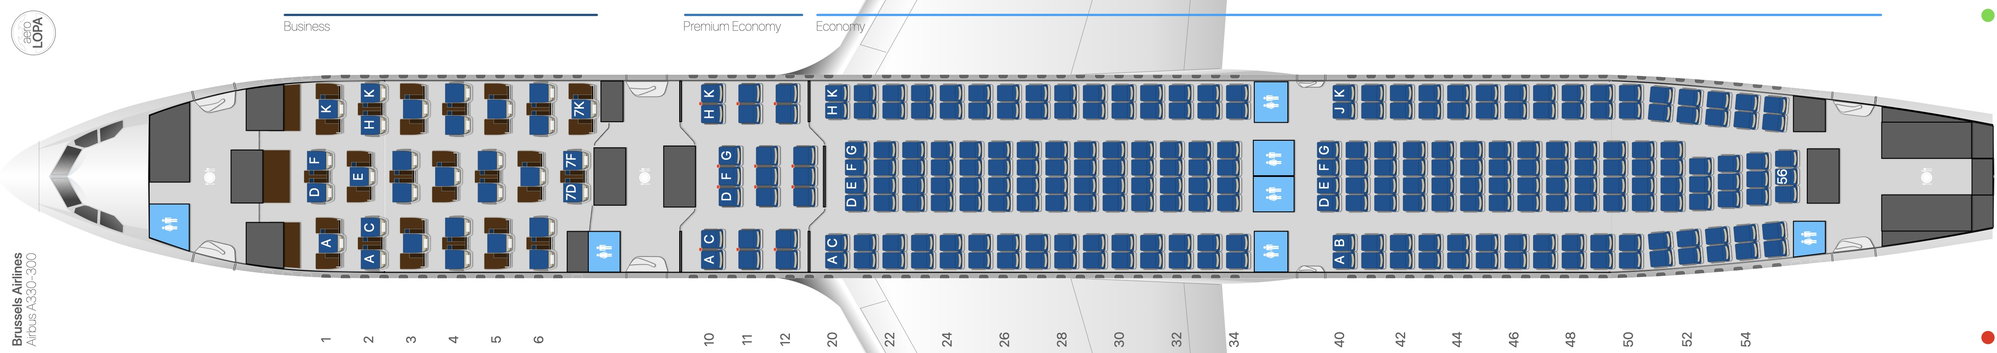 Accurate Seat Maps Of Lh Lo And Os